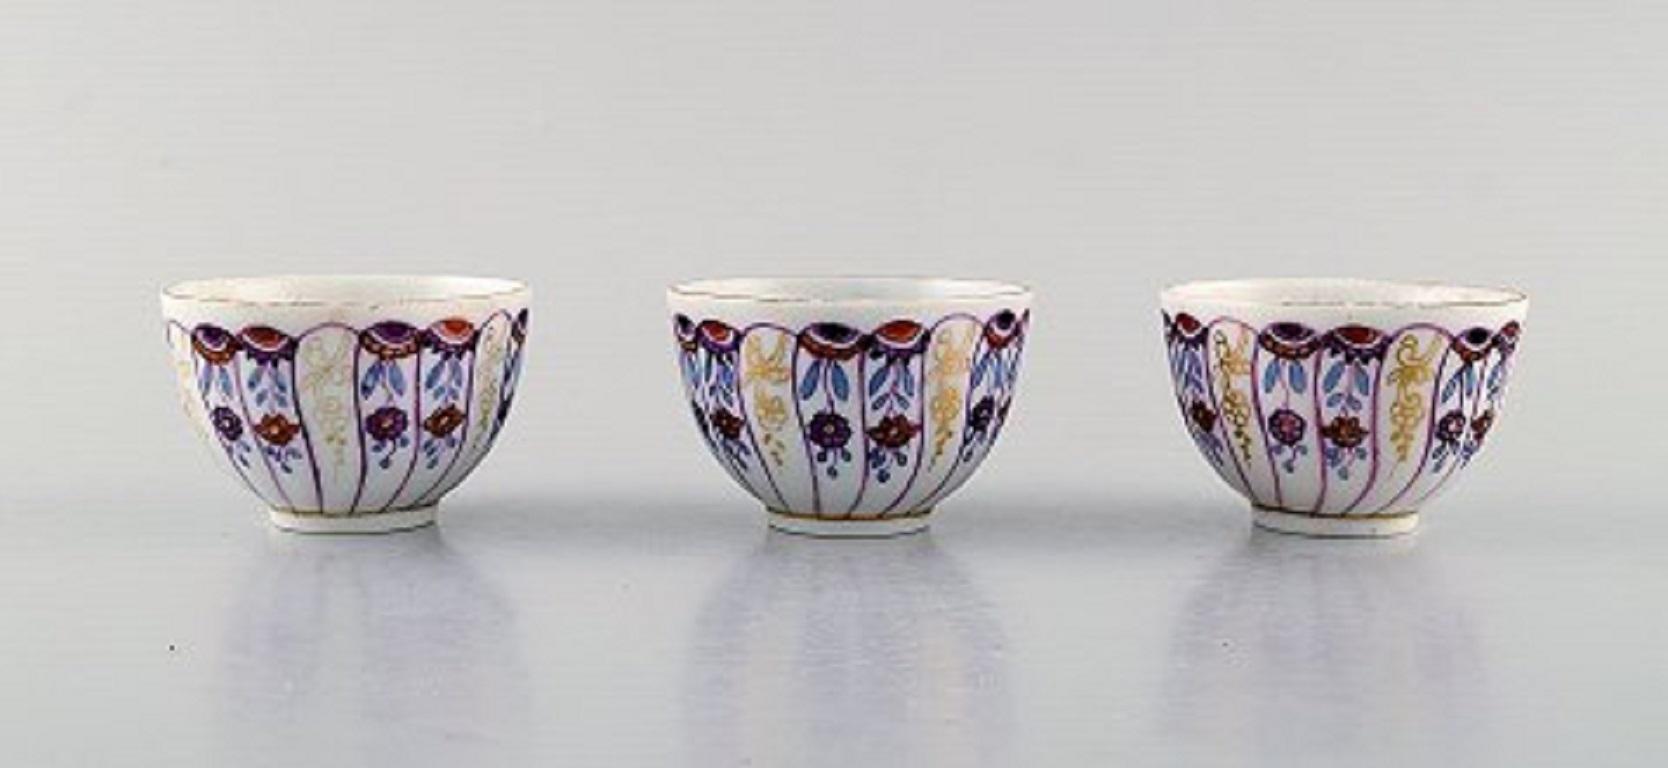 Royal Copenhagen. Nine antique and rare cups in hand painted porcelain. Museum Quality. Dated 1820-1850.
Measures: 6.5 x 4 cm.
In very good condition.
Stamped.